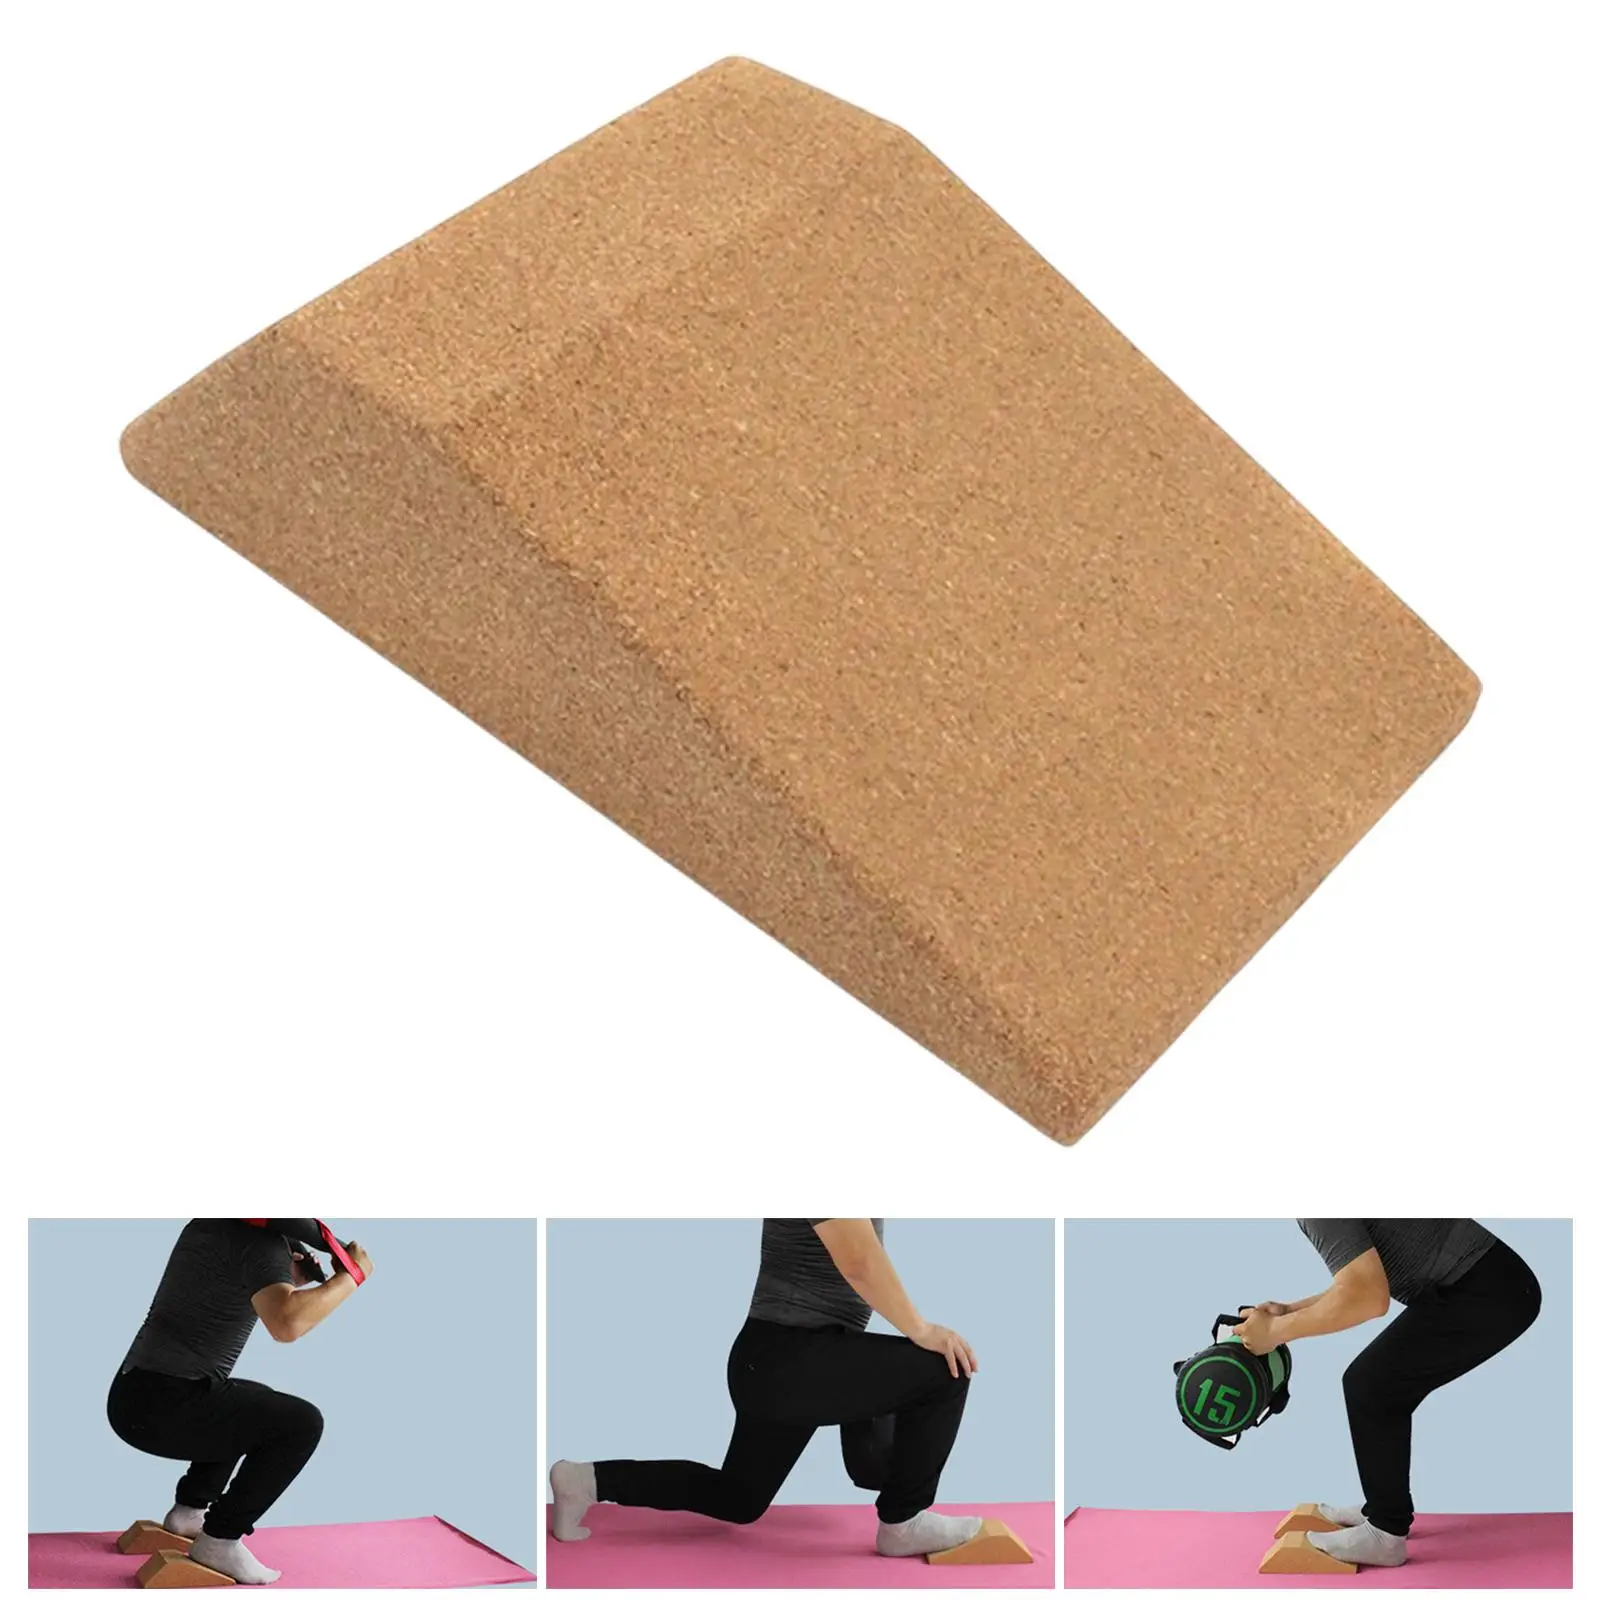 Cork Squat Wedge Yoga Block Squat Ramp Incline Board Non Slip Lightweight Exercise Brick for Workout